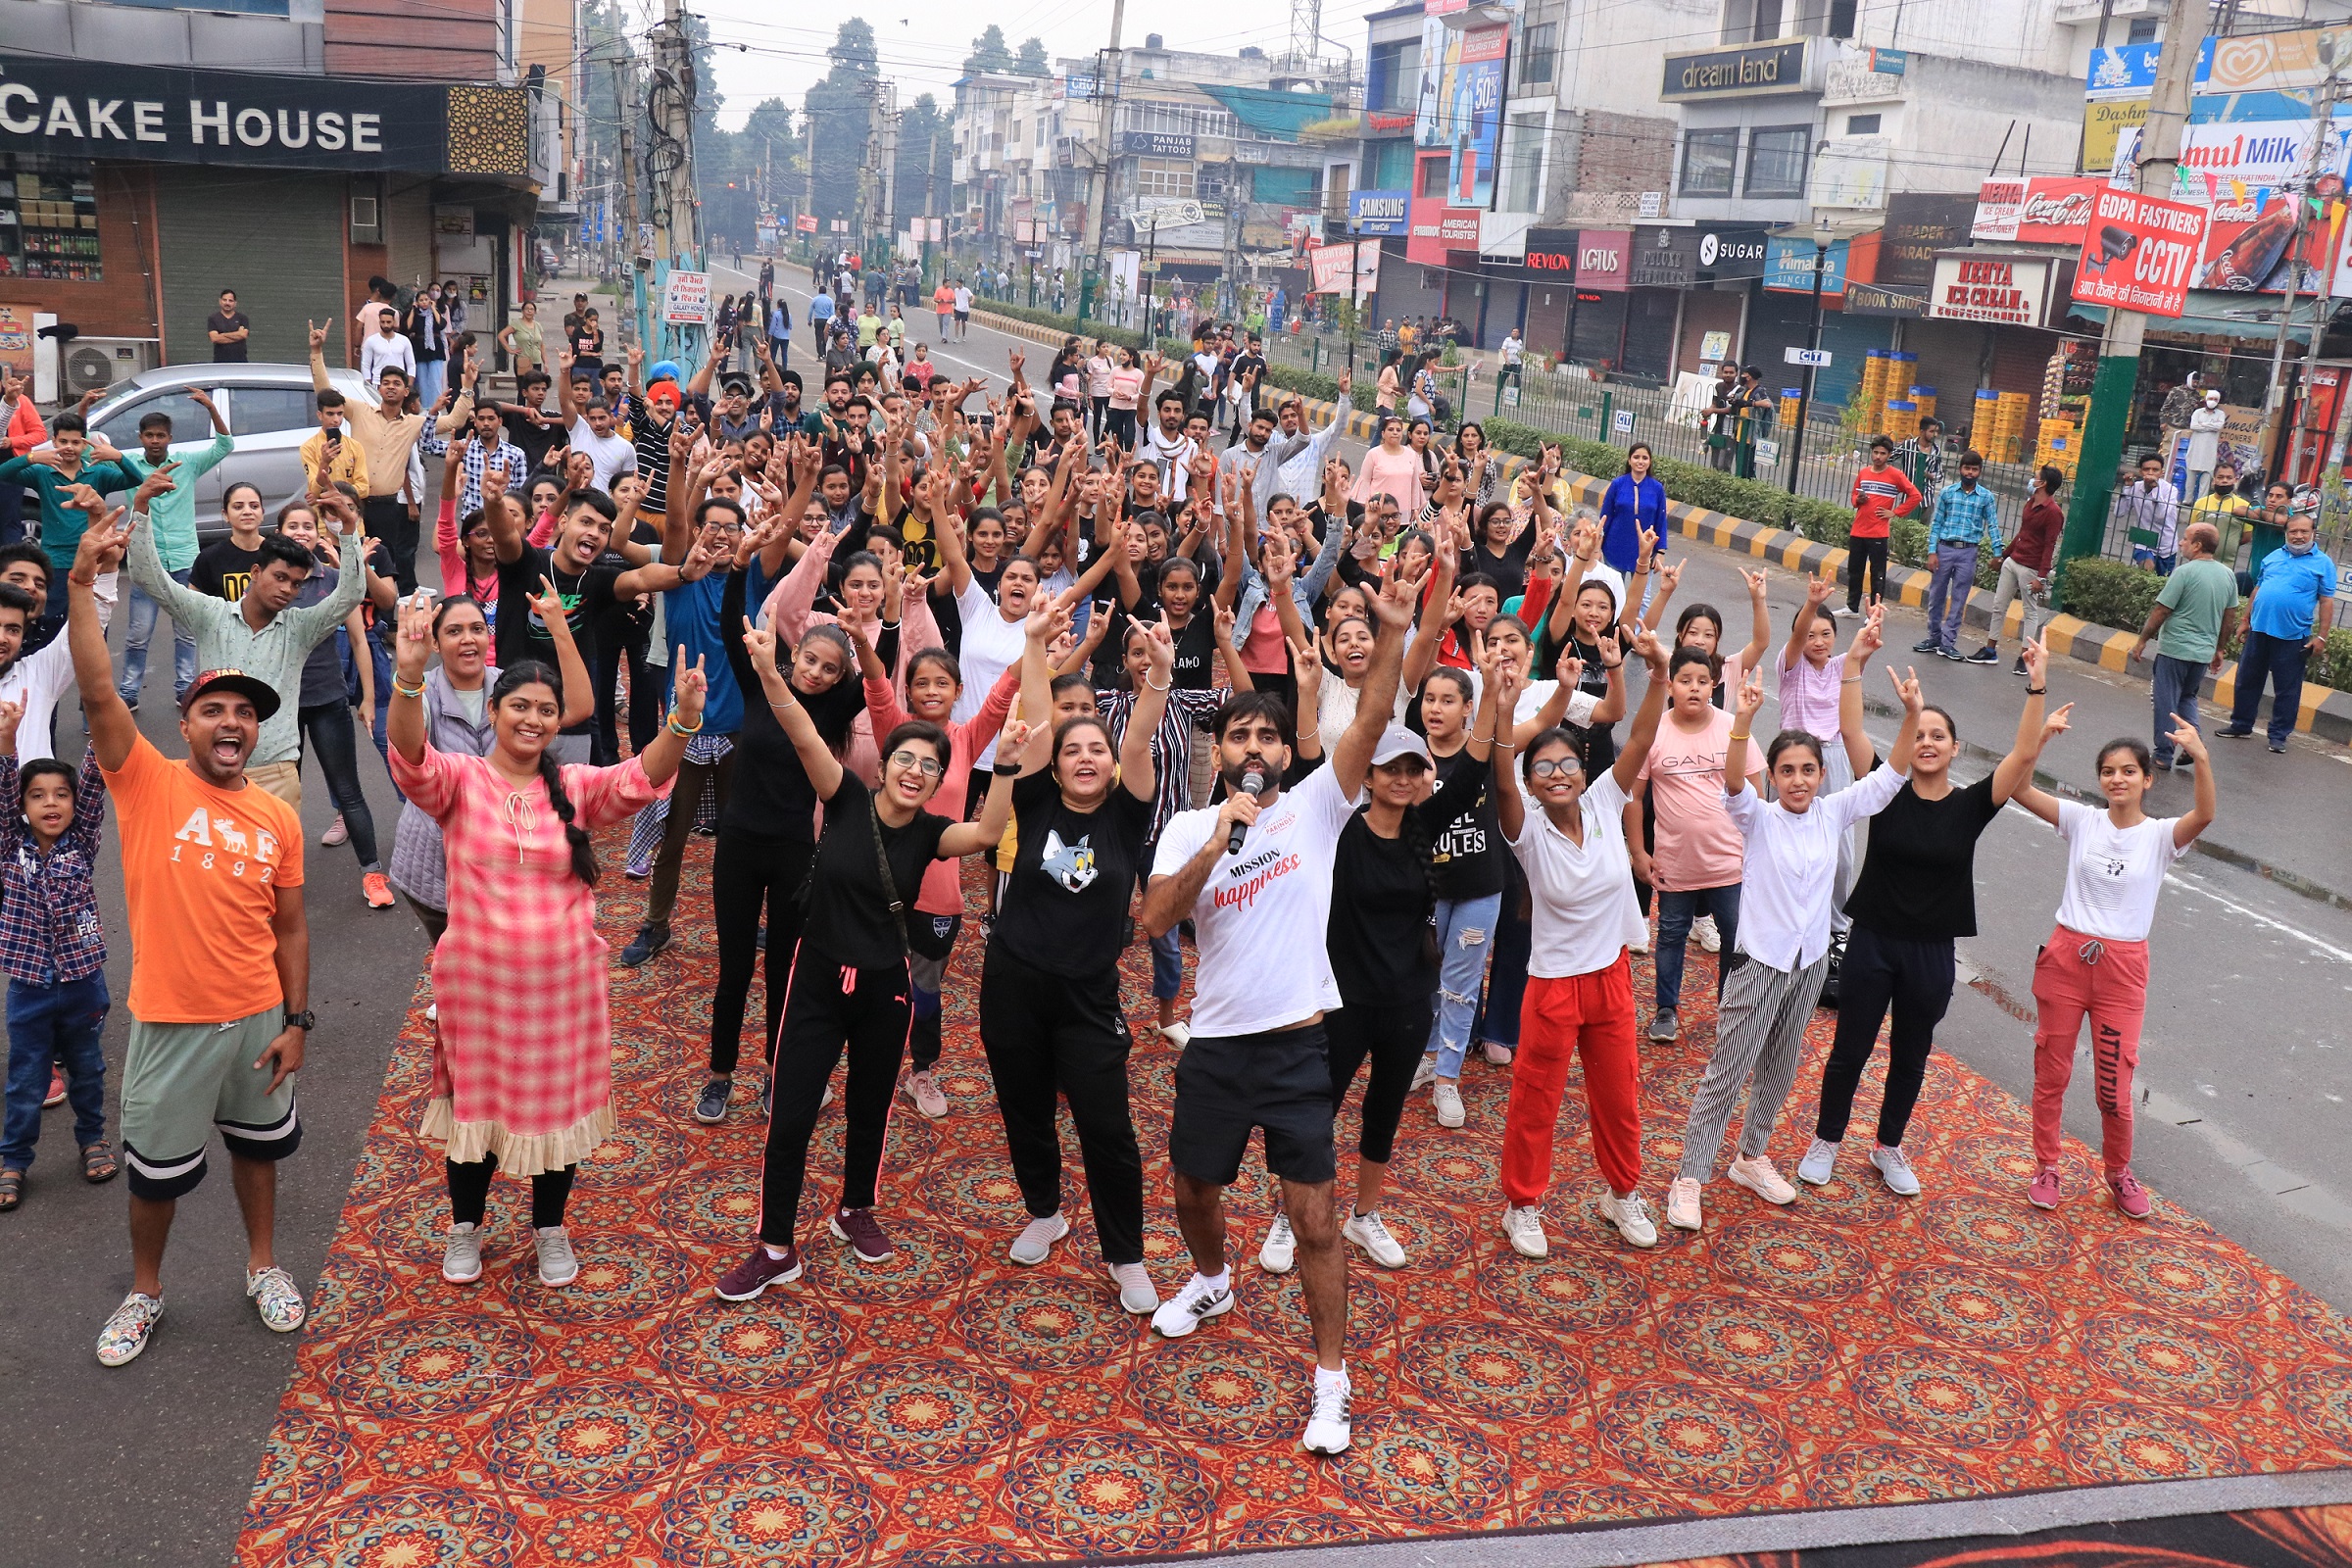 Jalandharites-take-part-in-open-dance-during-WOW-event-organised-by-CT-Group-in-Model-Town